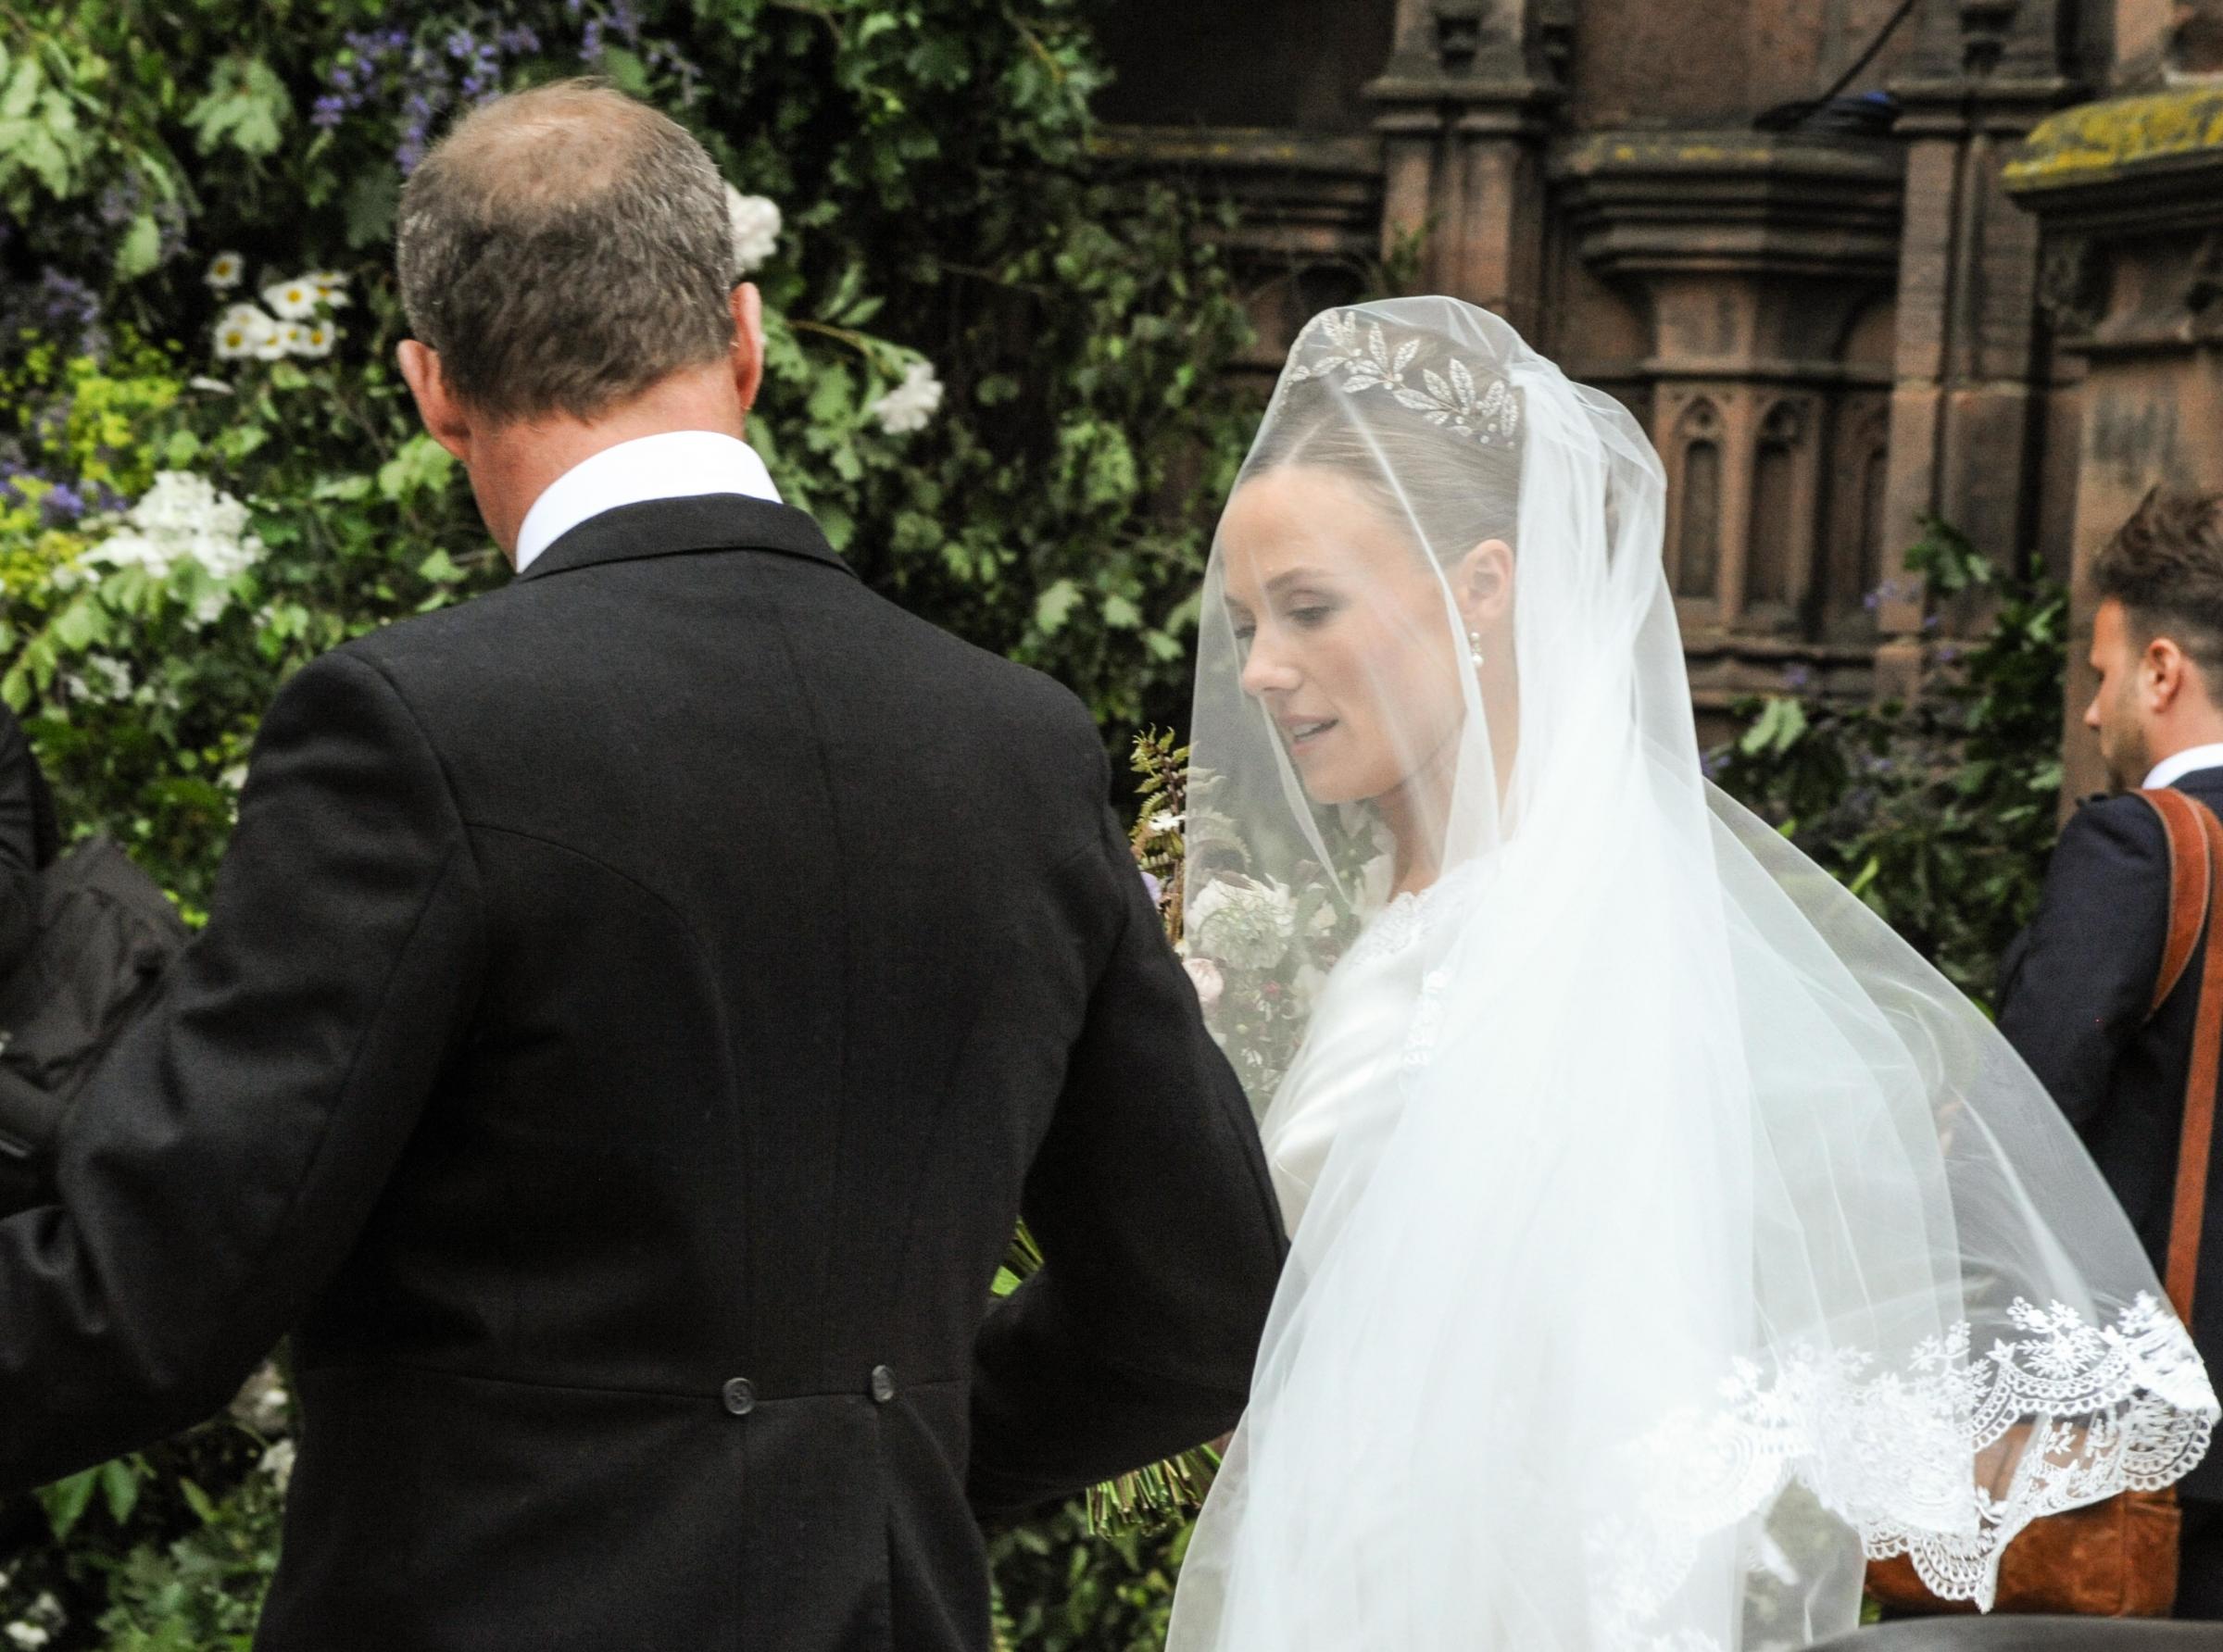 Wedding at Chester Cathedral of Duke of Westminster and Miss Olivia Henson. Photo: Simon Warburton